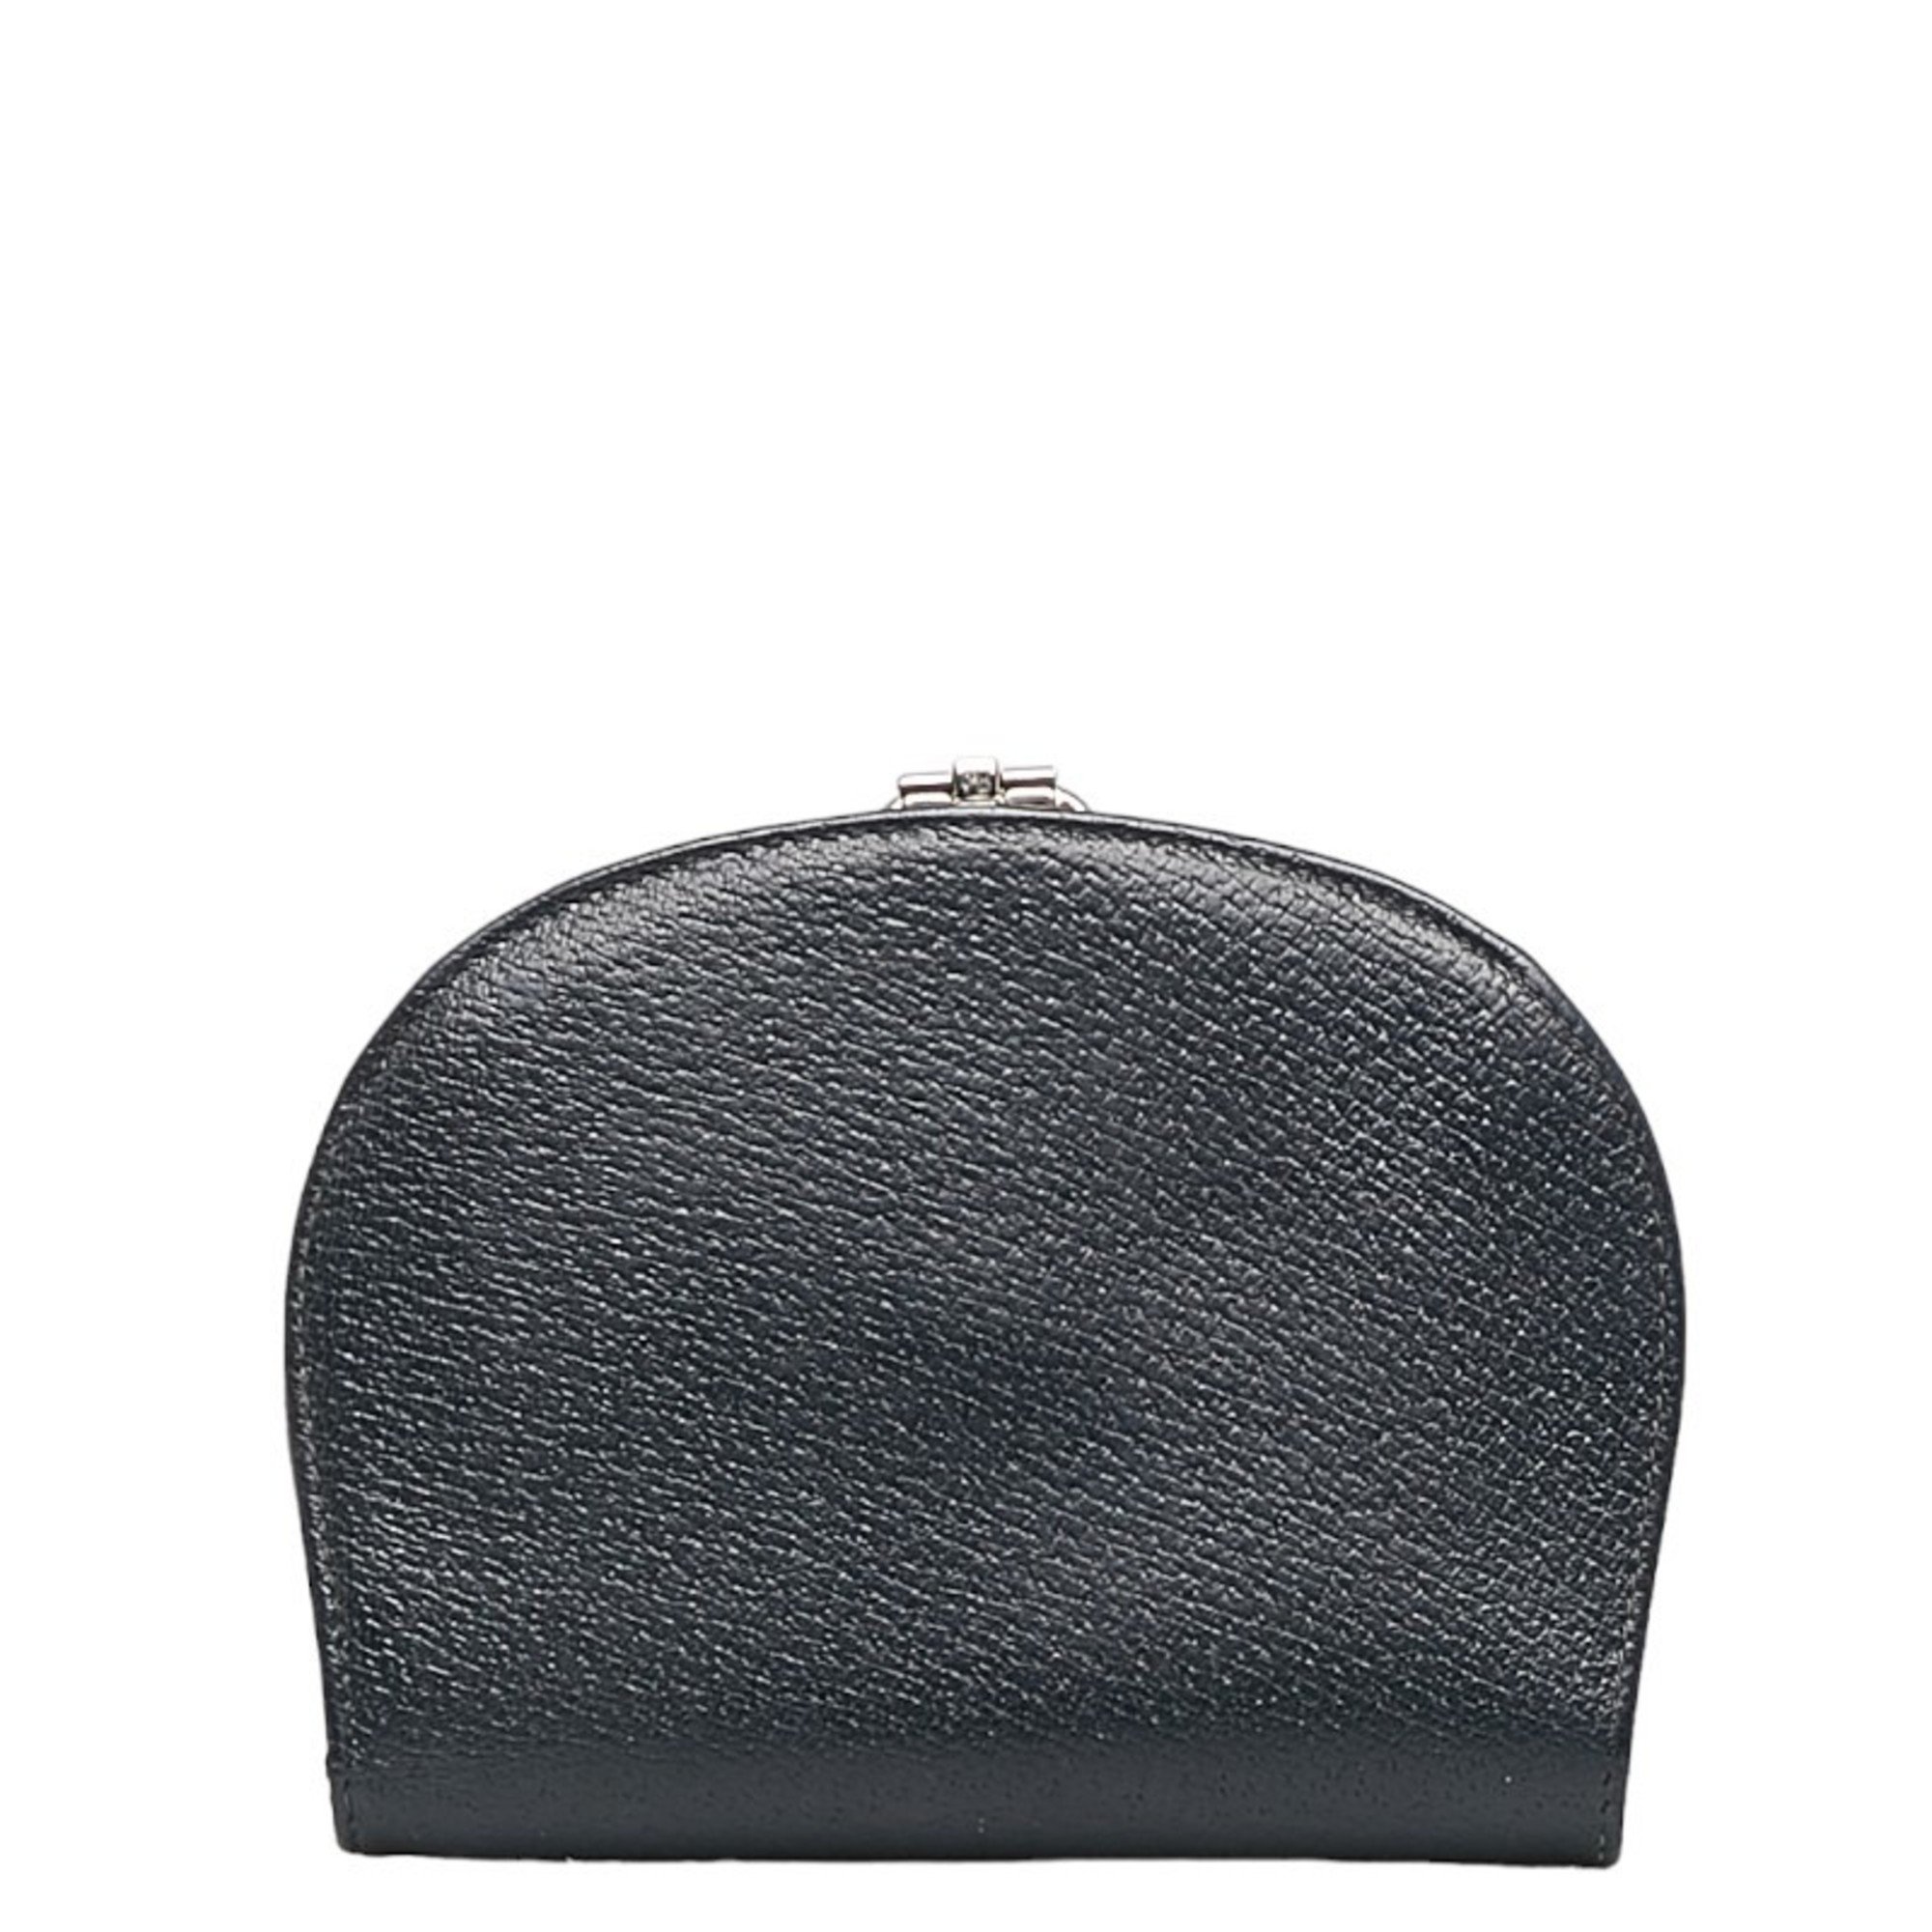 Gucci Bifold Wallet Navy Leather Women's GUCCI